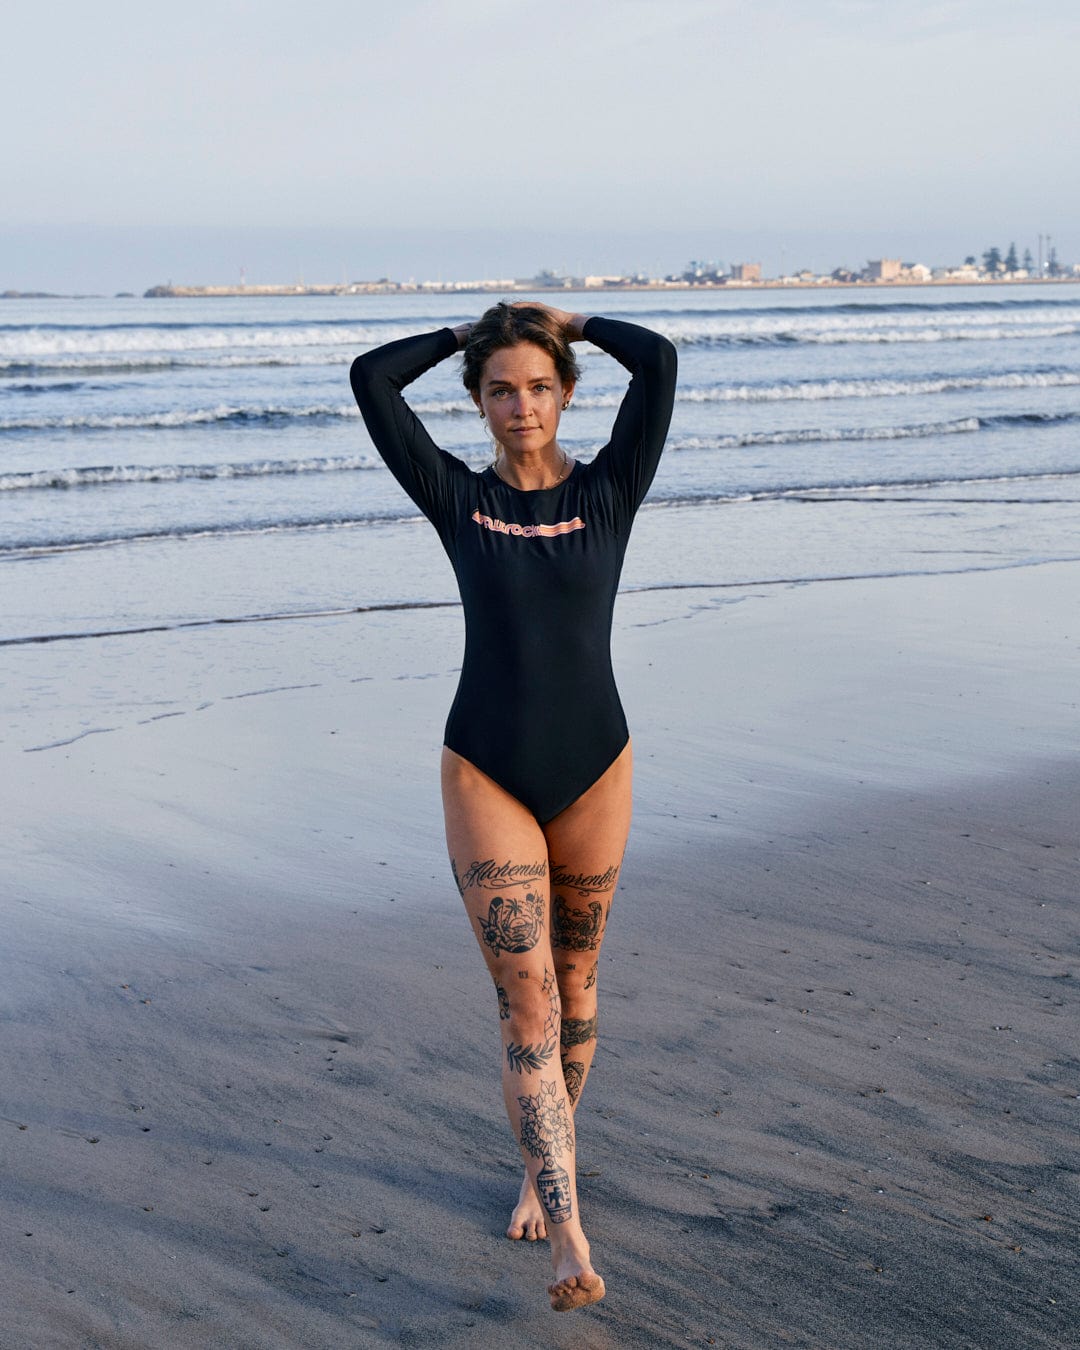 A woman in a Saltrock Cora Retro recycled women's long sleeve swimsuit in dark grey stands on a beach, hands on her head, with visible tattoos on her legs and an industrial backdrop.